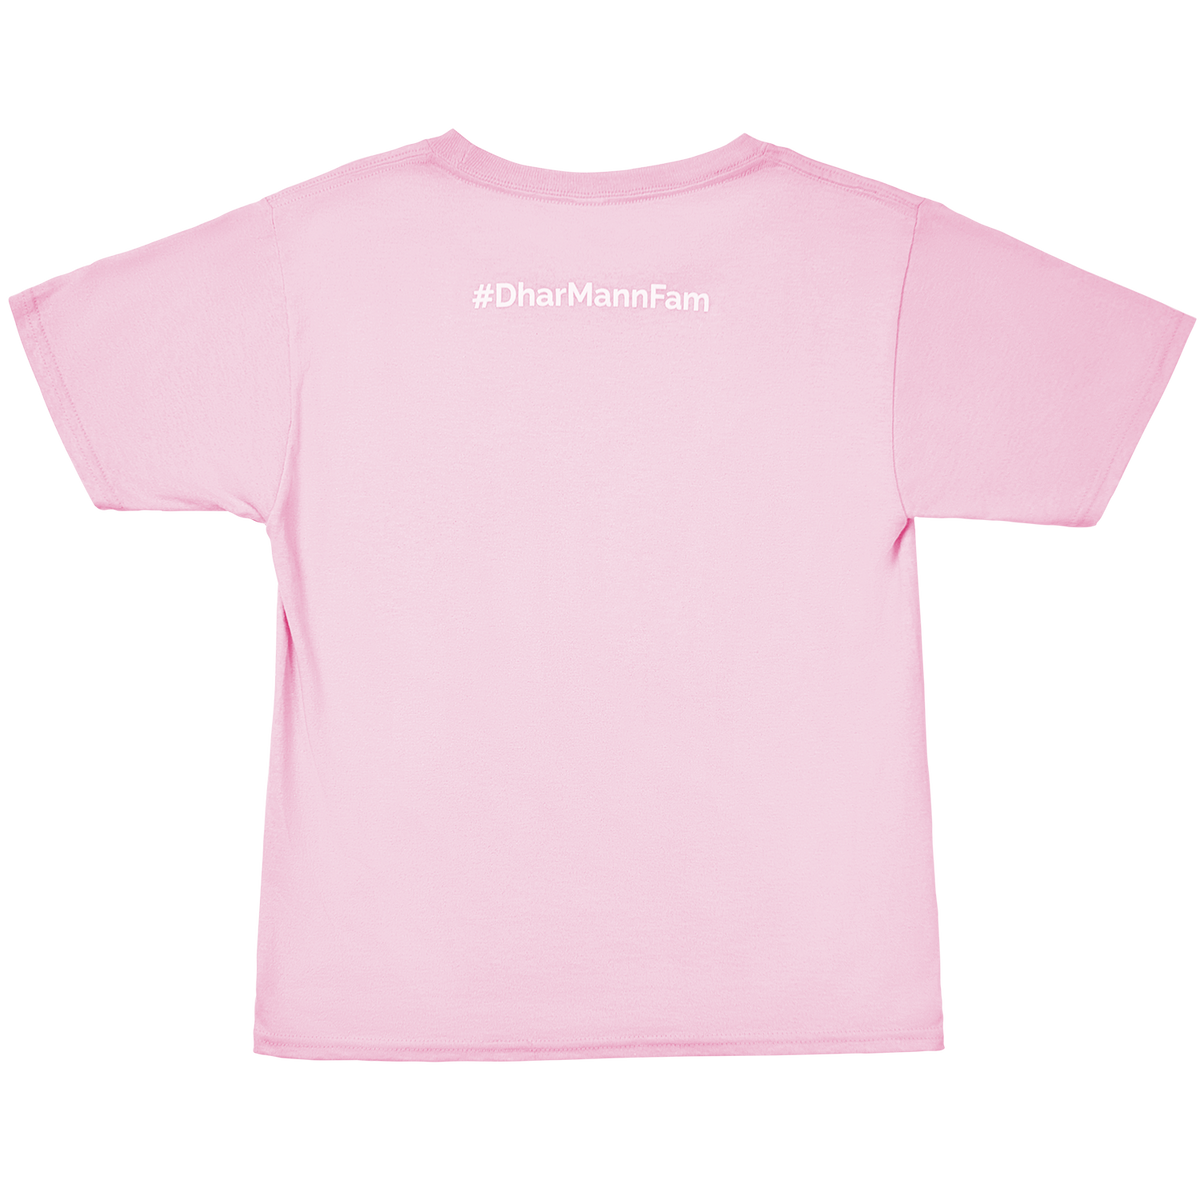 So You See Youth T-Shirt (Pink) Youth Large / Pink